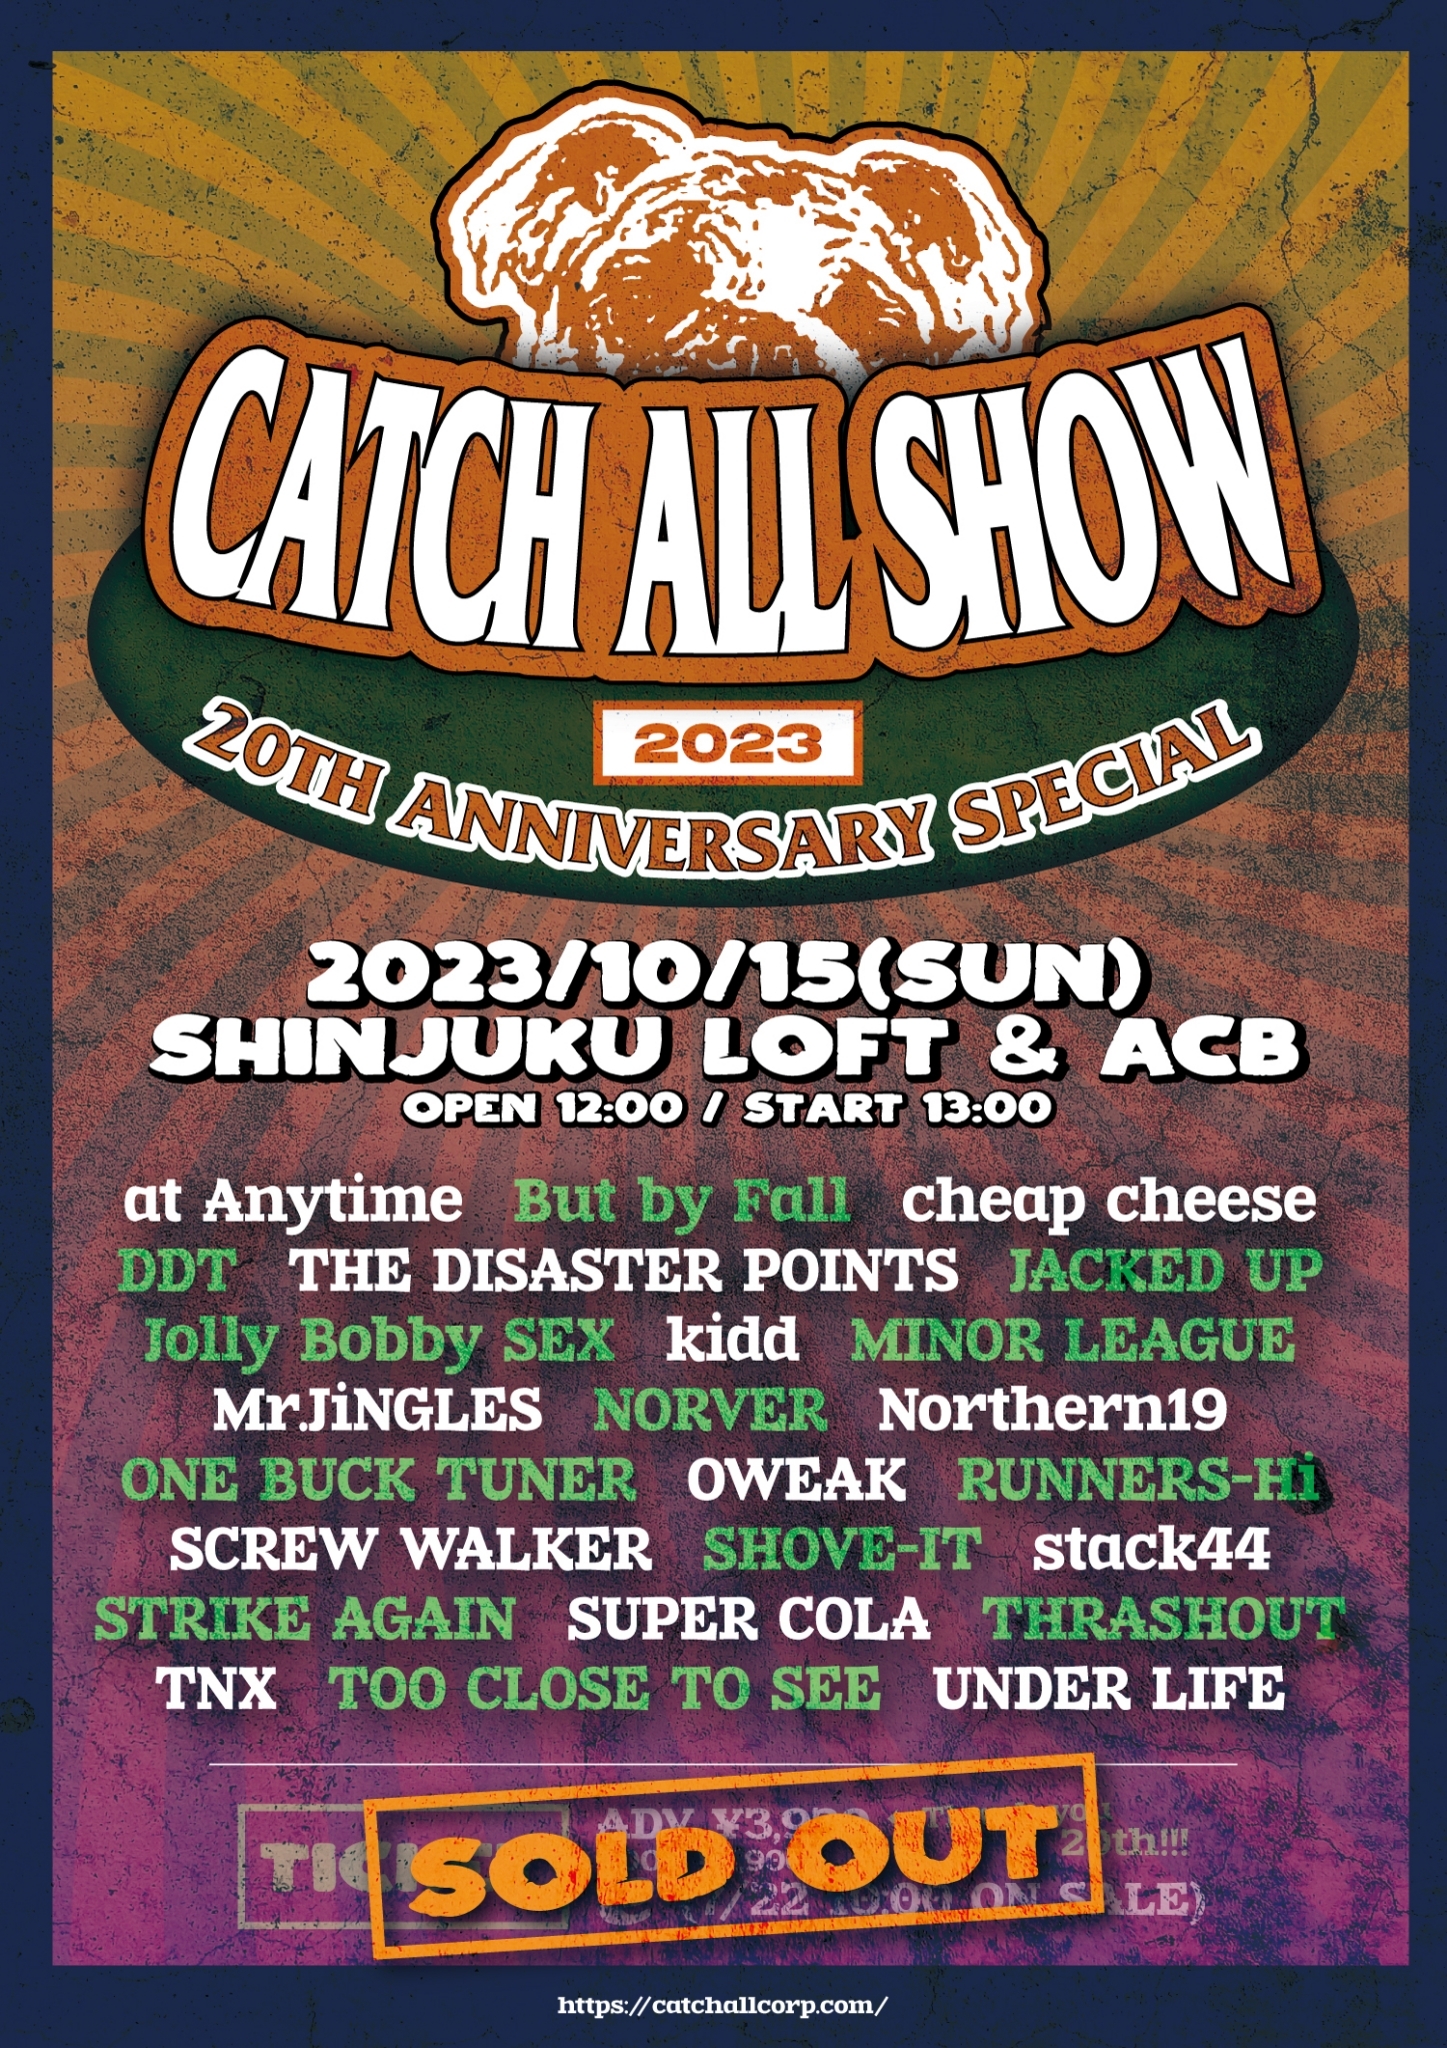 CATCH ALL SHOW 2023 〜20TH ANNIVERSARY SPECIAL〜